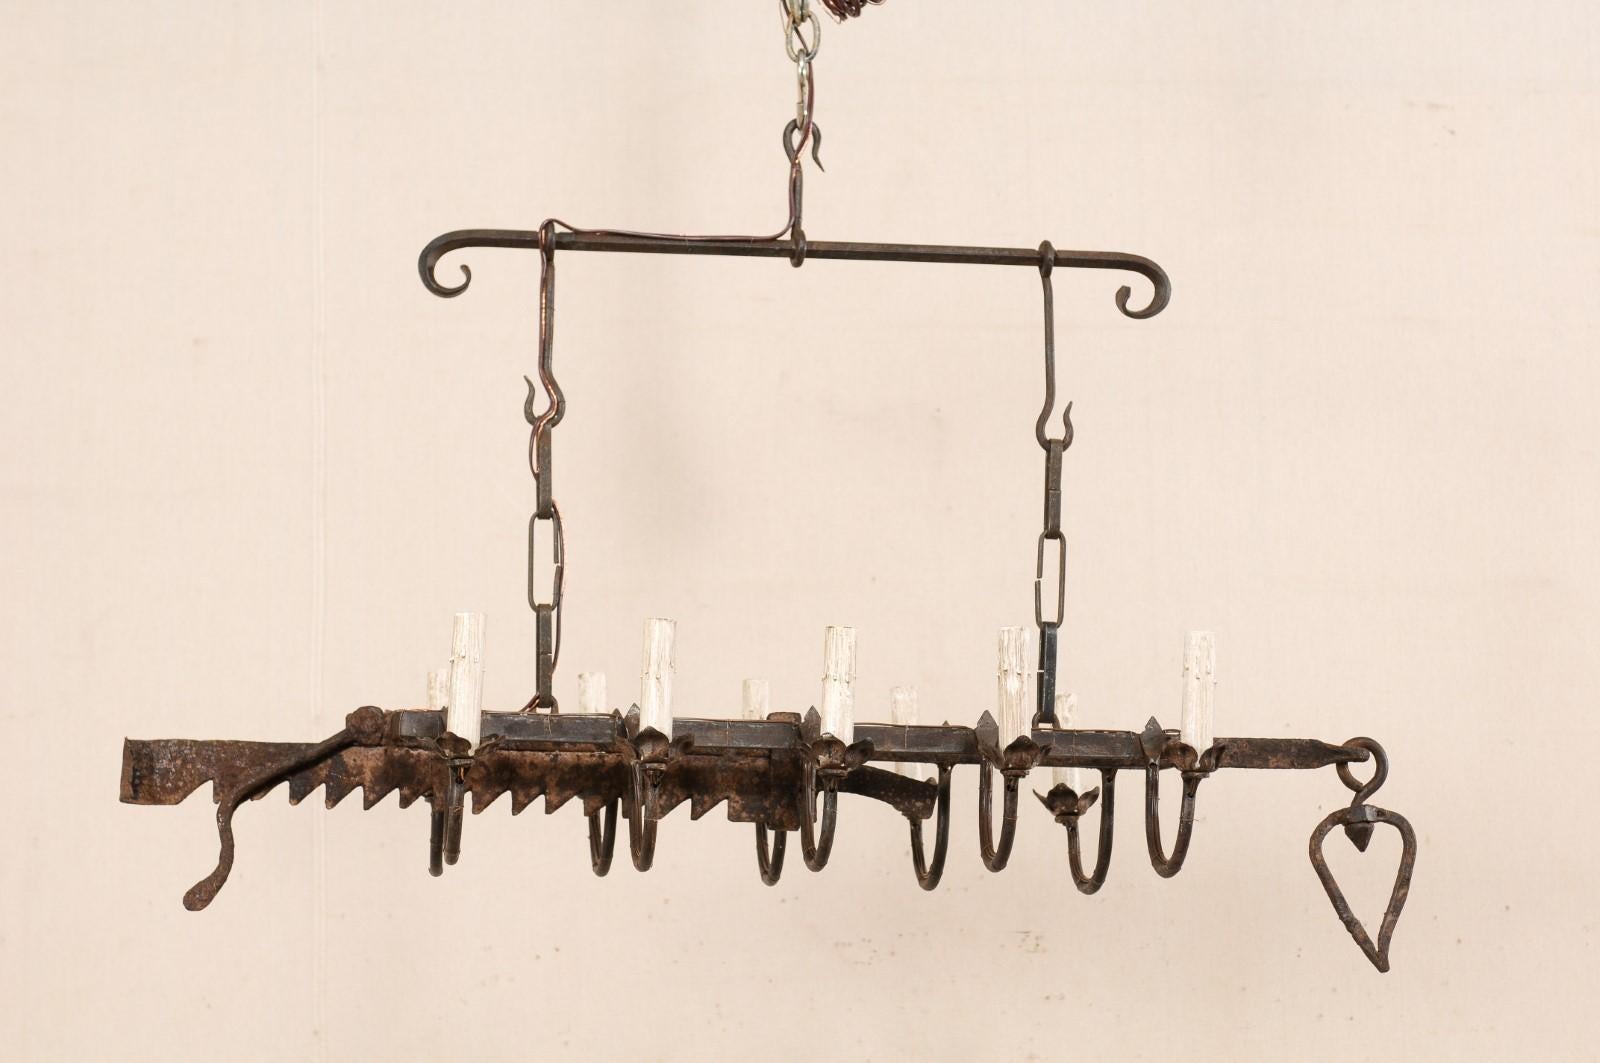 A vintage French ten-light forged-iron chandelier made from a 19th century spit-jack. This French hanging light-fixture, from the mid-20th century, has been fashioned from an earlier 19th century spit-jack, which was once used as a type of